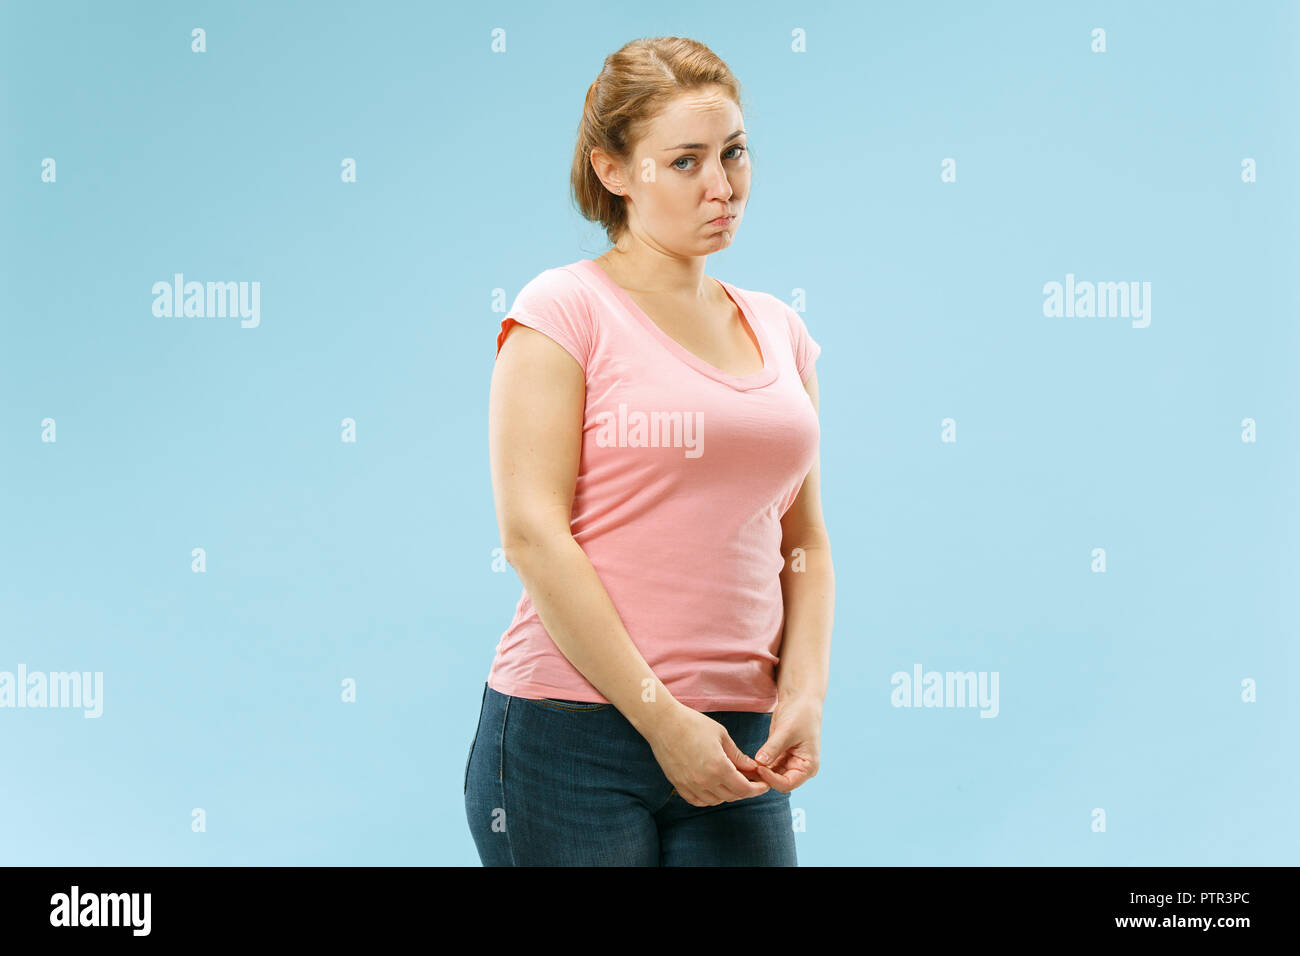 Why is that. Beautiful female half-length portrait isolated on trendy blue studio backgroud. Young emotional surprised, frustrated and bewildered woman. Human emotions, facial expression concept. Stock Photo